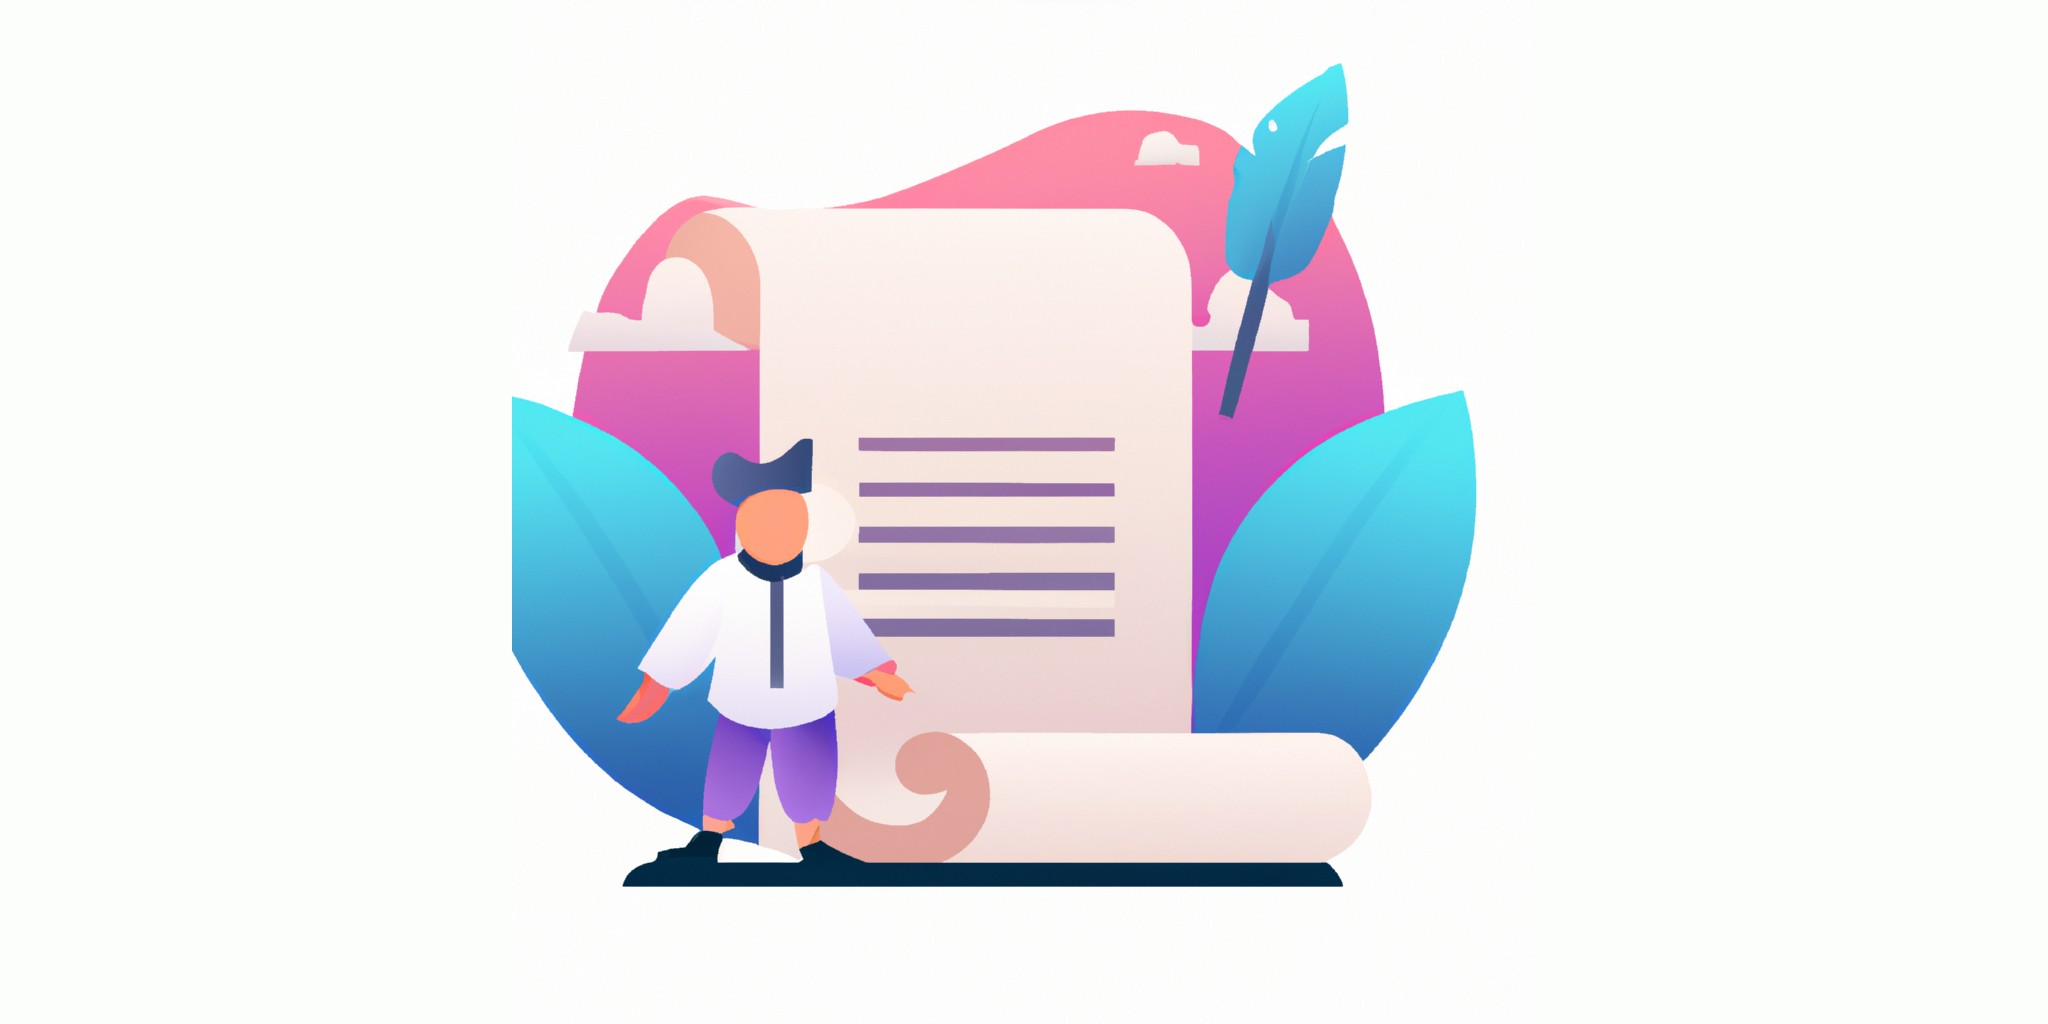 a scroll and quill with a person in front in flat illustration style with gradients and white background